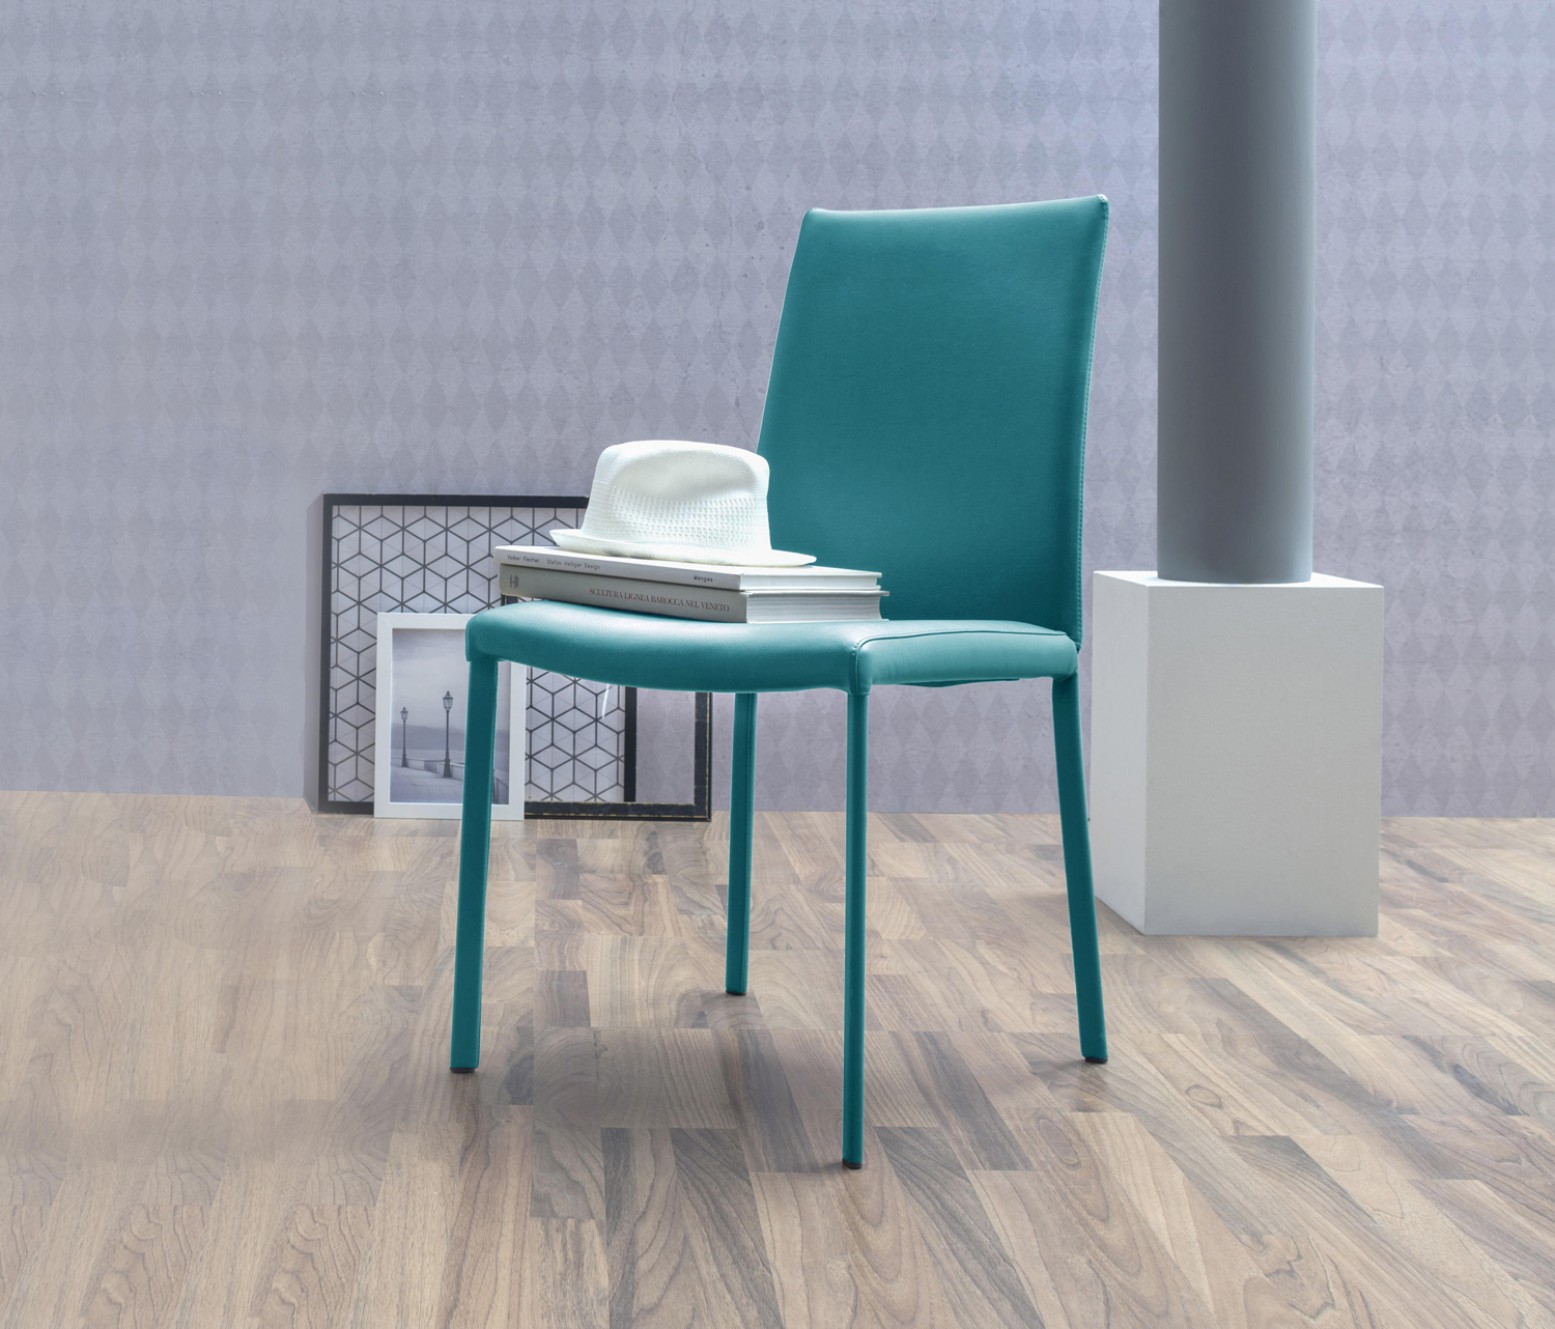 Navarra Dining Chair, Turquoise Blue Eco-Leather Buy ...